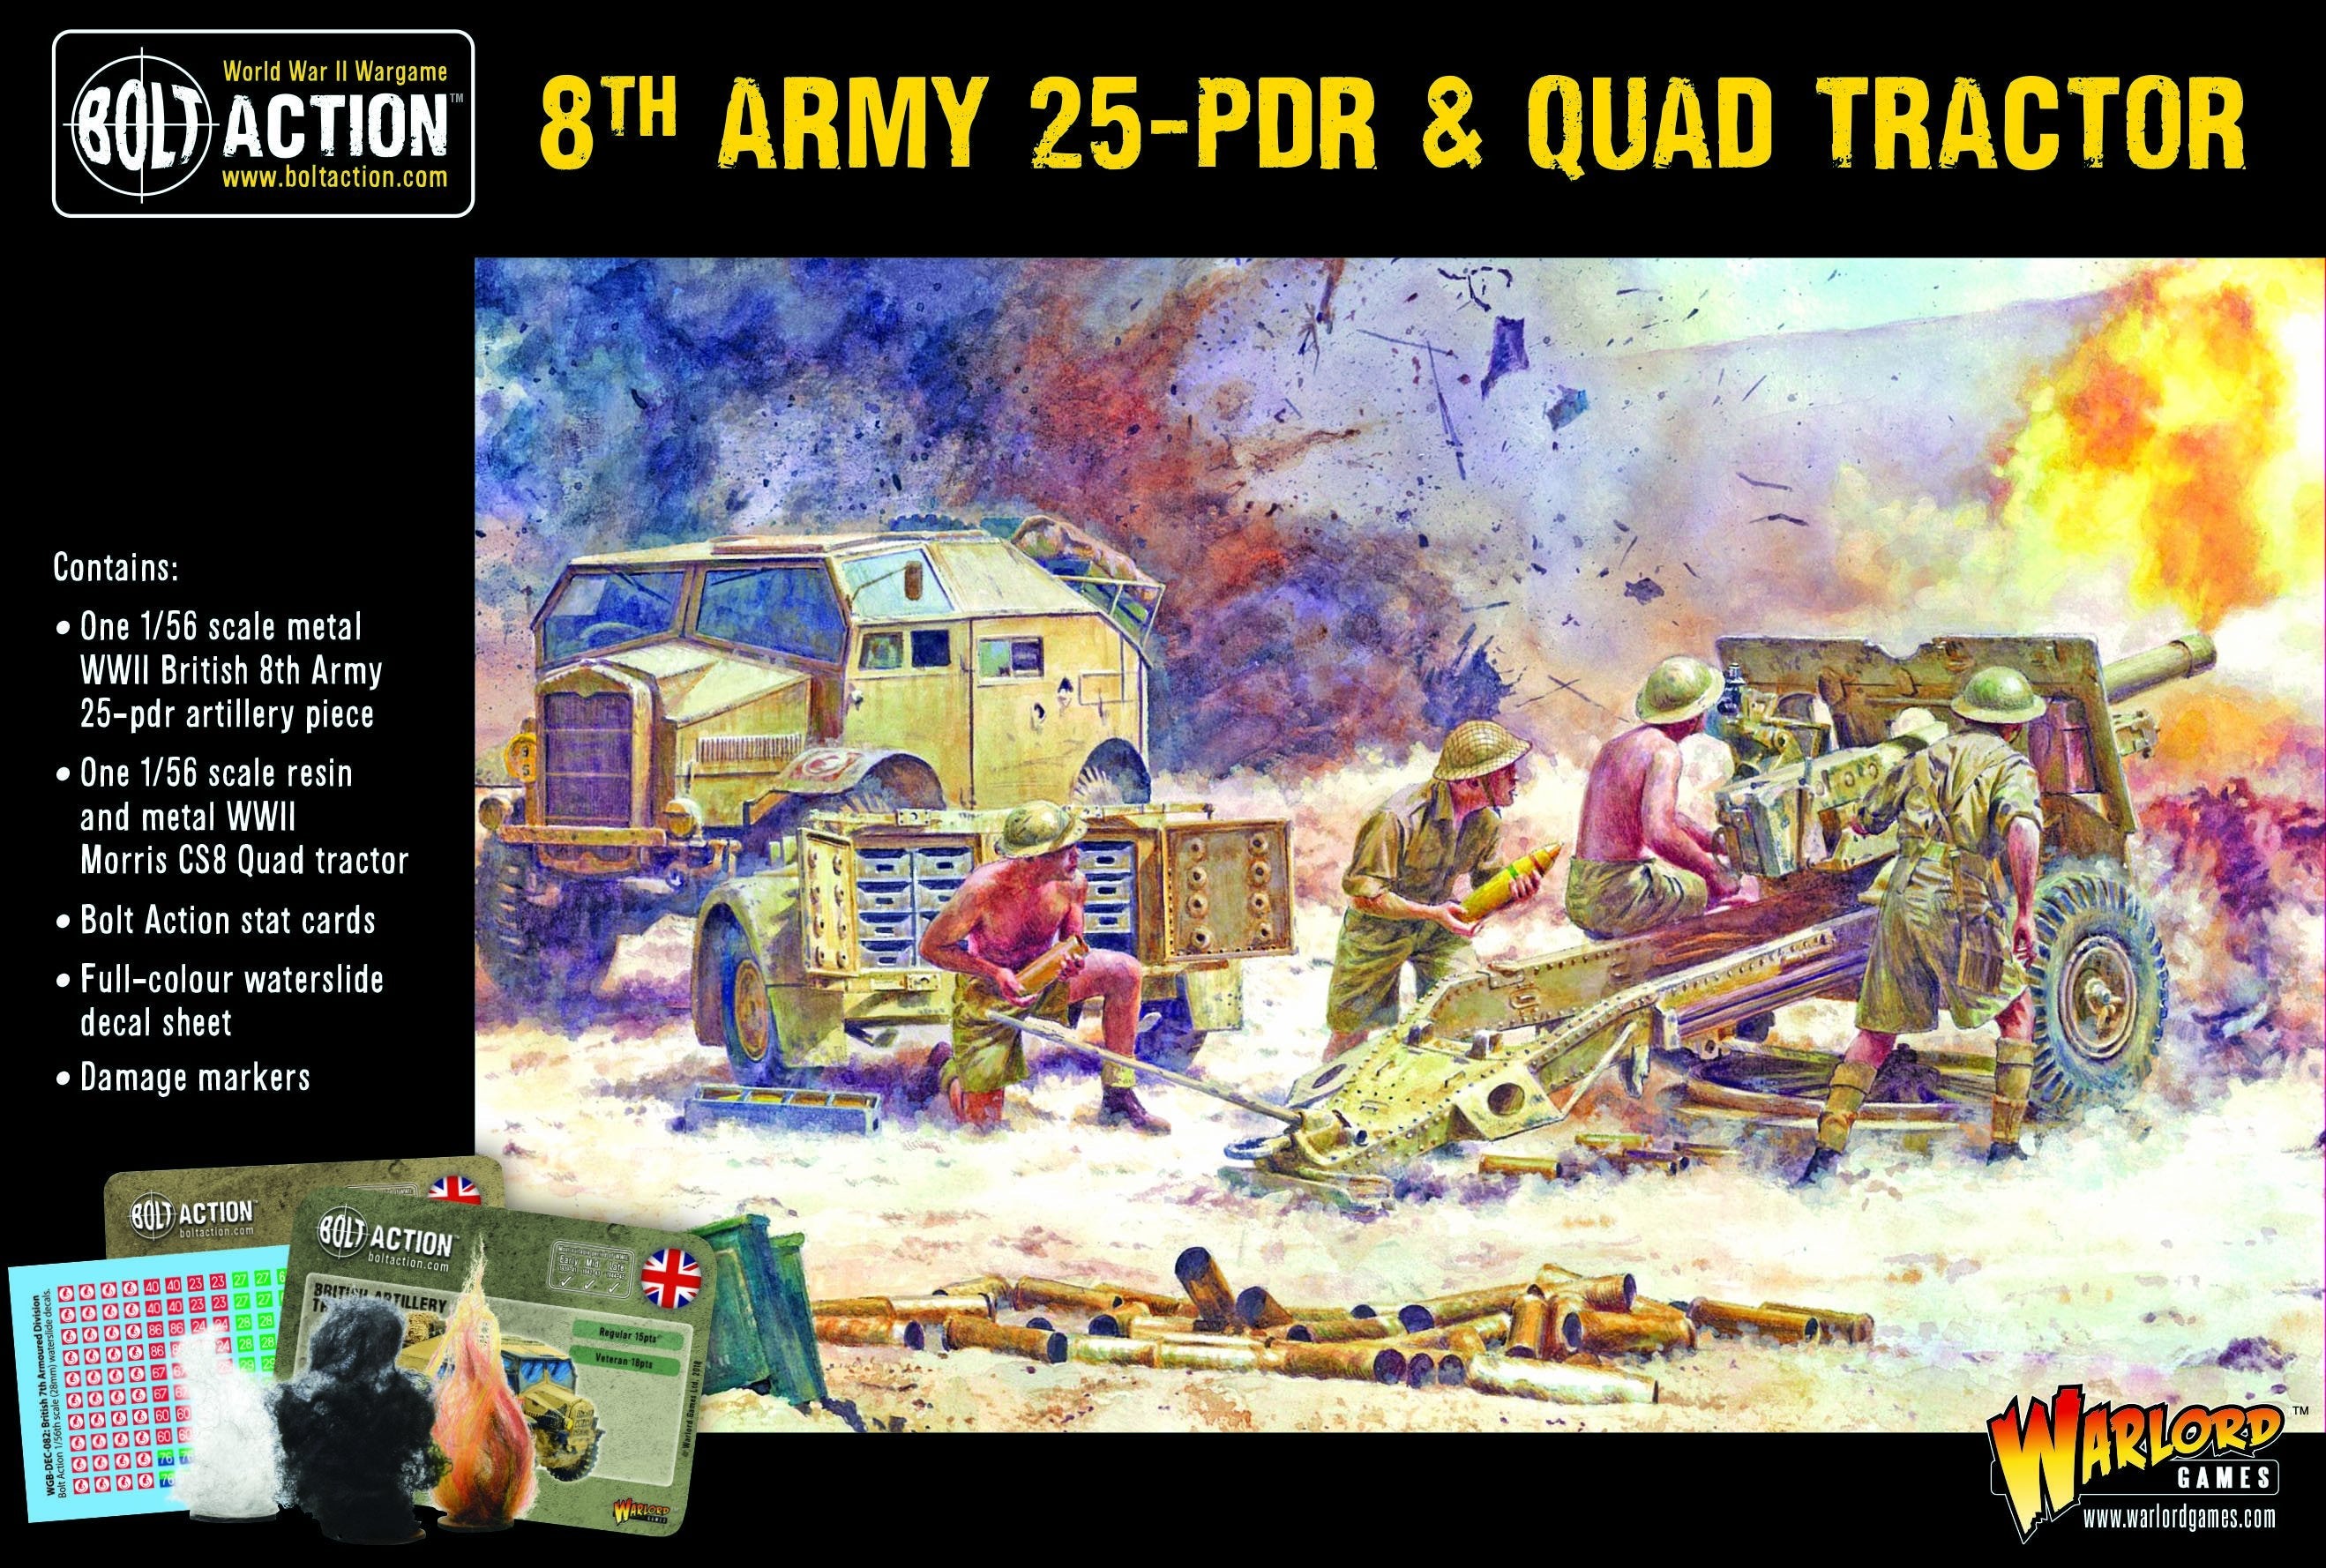 Bolt Action: 8th Army 25-pdr & Quad Tractor WWII British Light Artillery